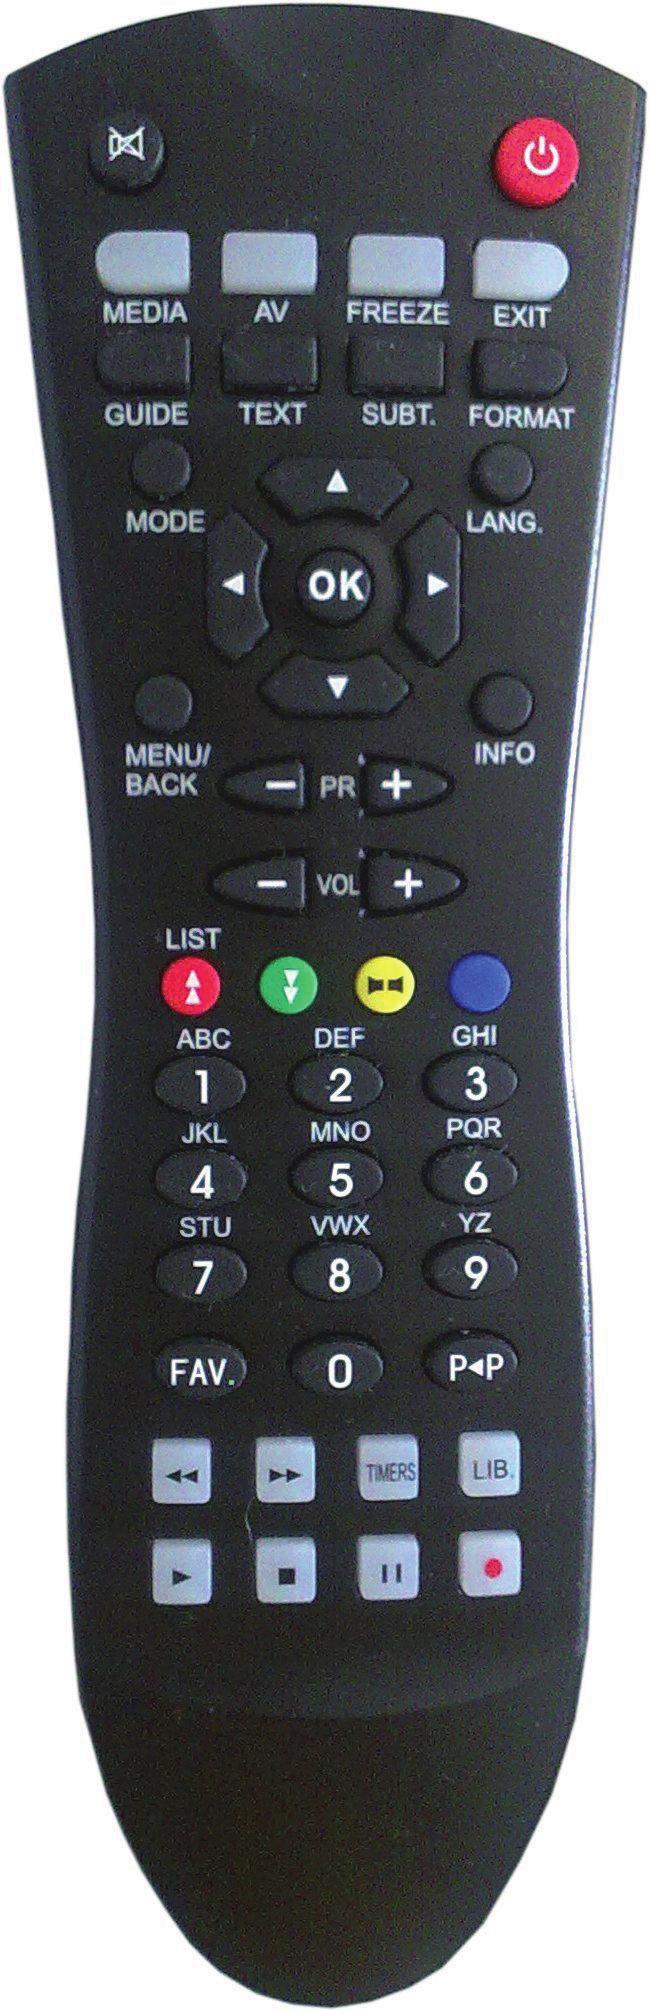 Overview of the Remote Control Mute Media Browser Button Teletext Electronic Program Guide SatFree mode/ Regular mode Standby Freeze Exit Subtitle On-Off HDMI Resolution Language Navigation Buttons